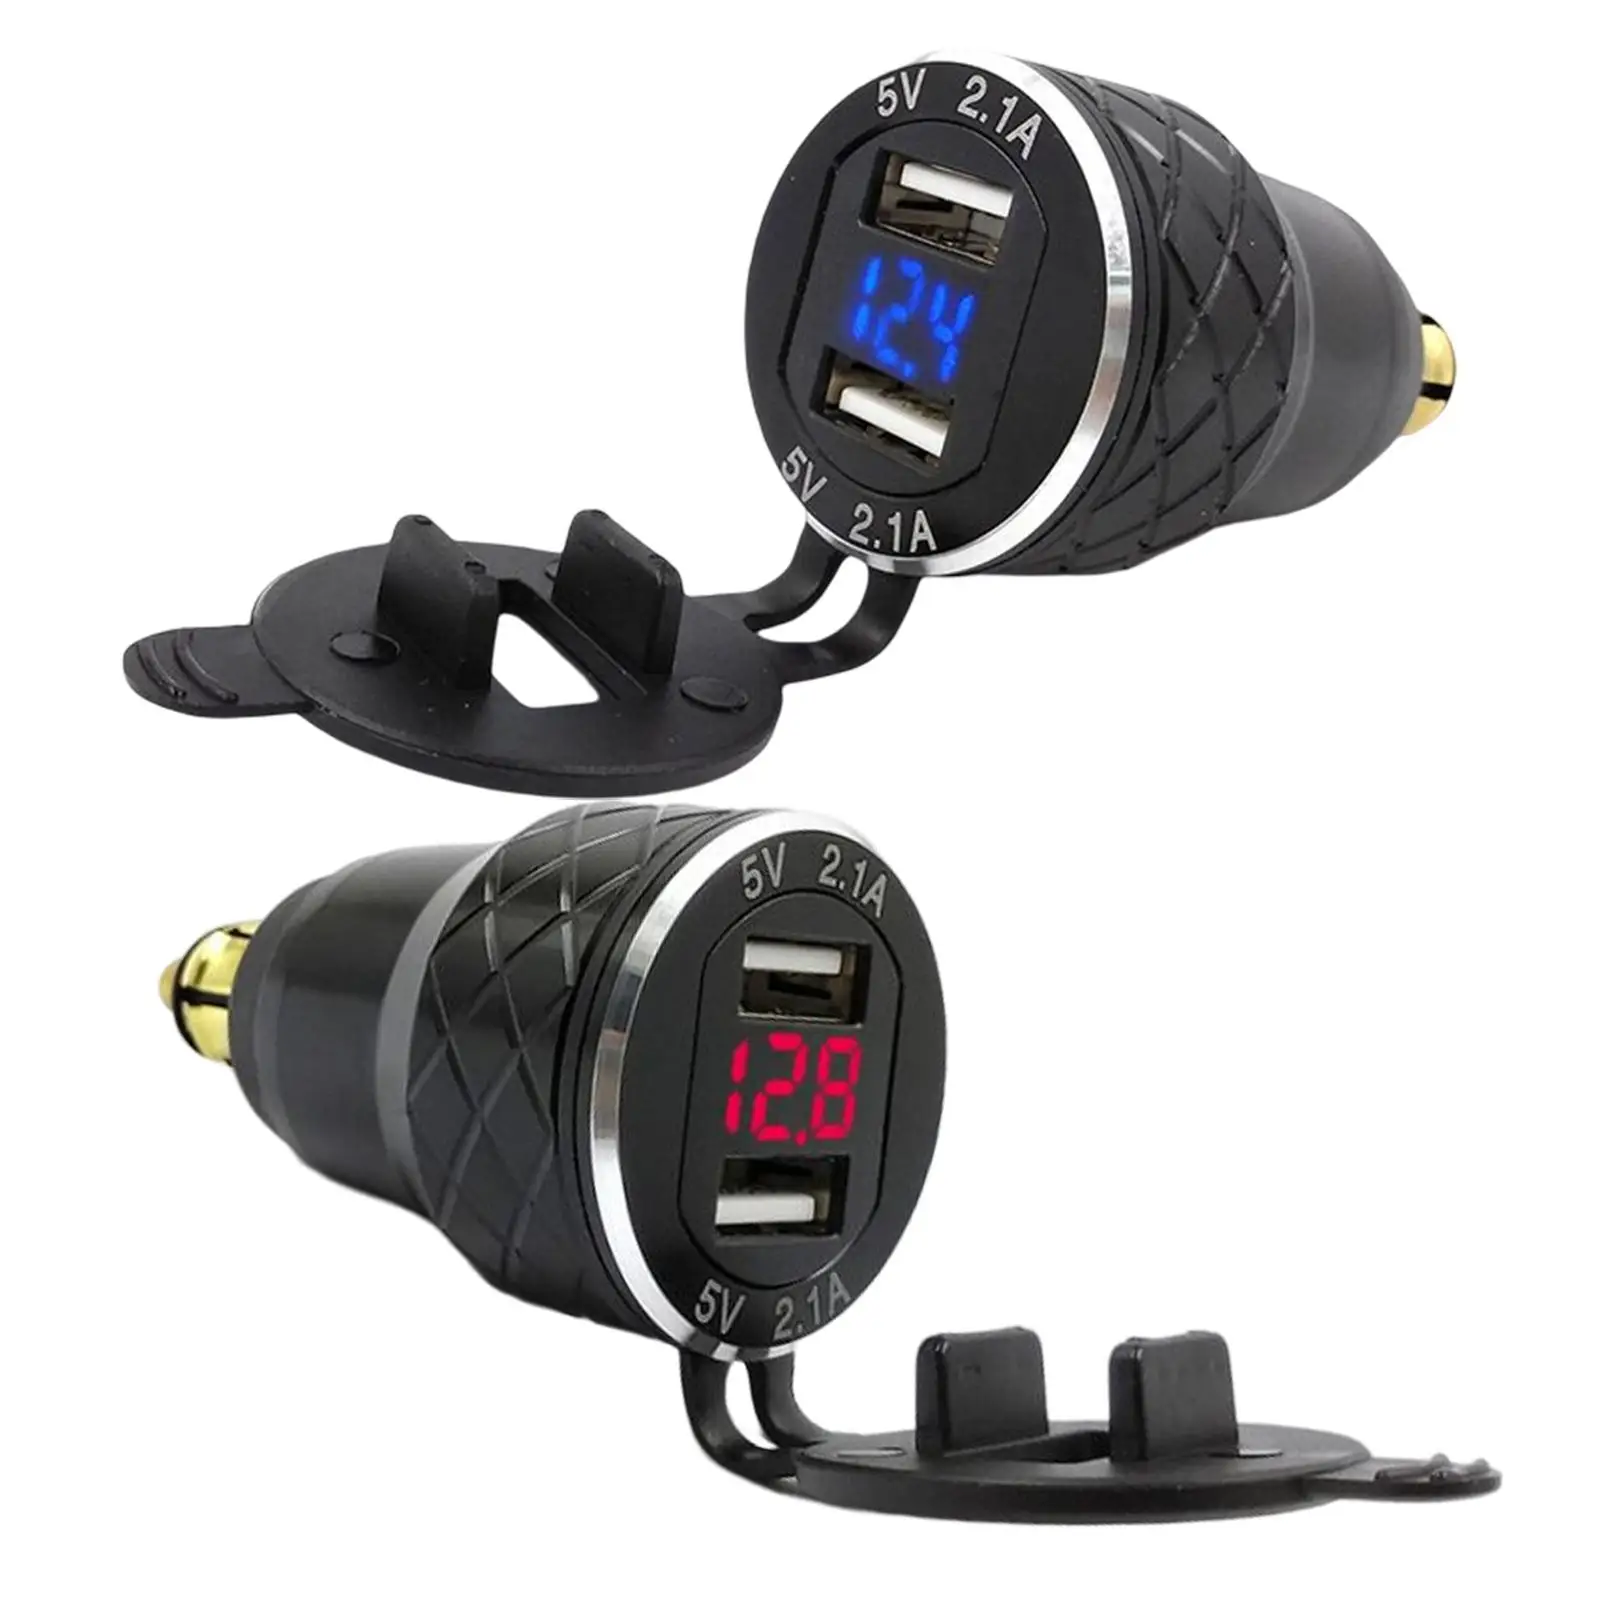 Motorcycle Dual USB Charger LED Display Quick Charge Voltage Display Aluminum 12V-24V Waterproof Charger Socket for 2 Port